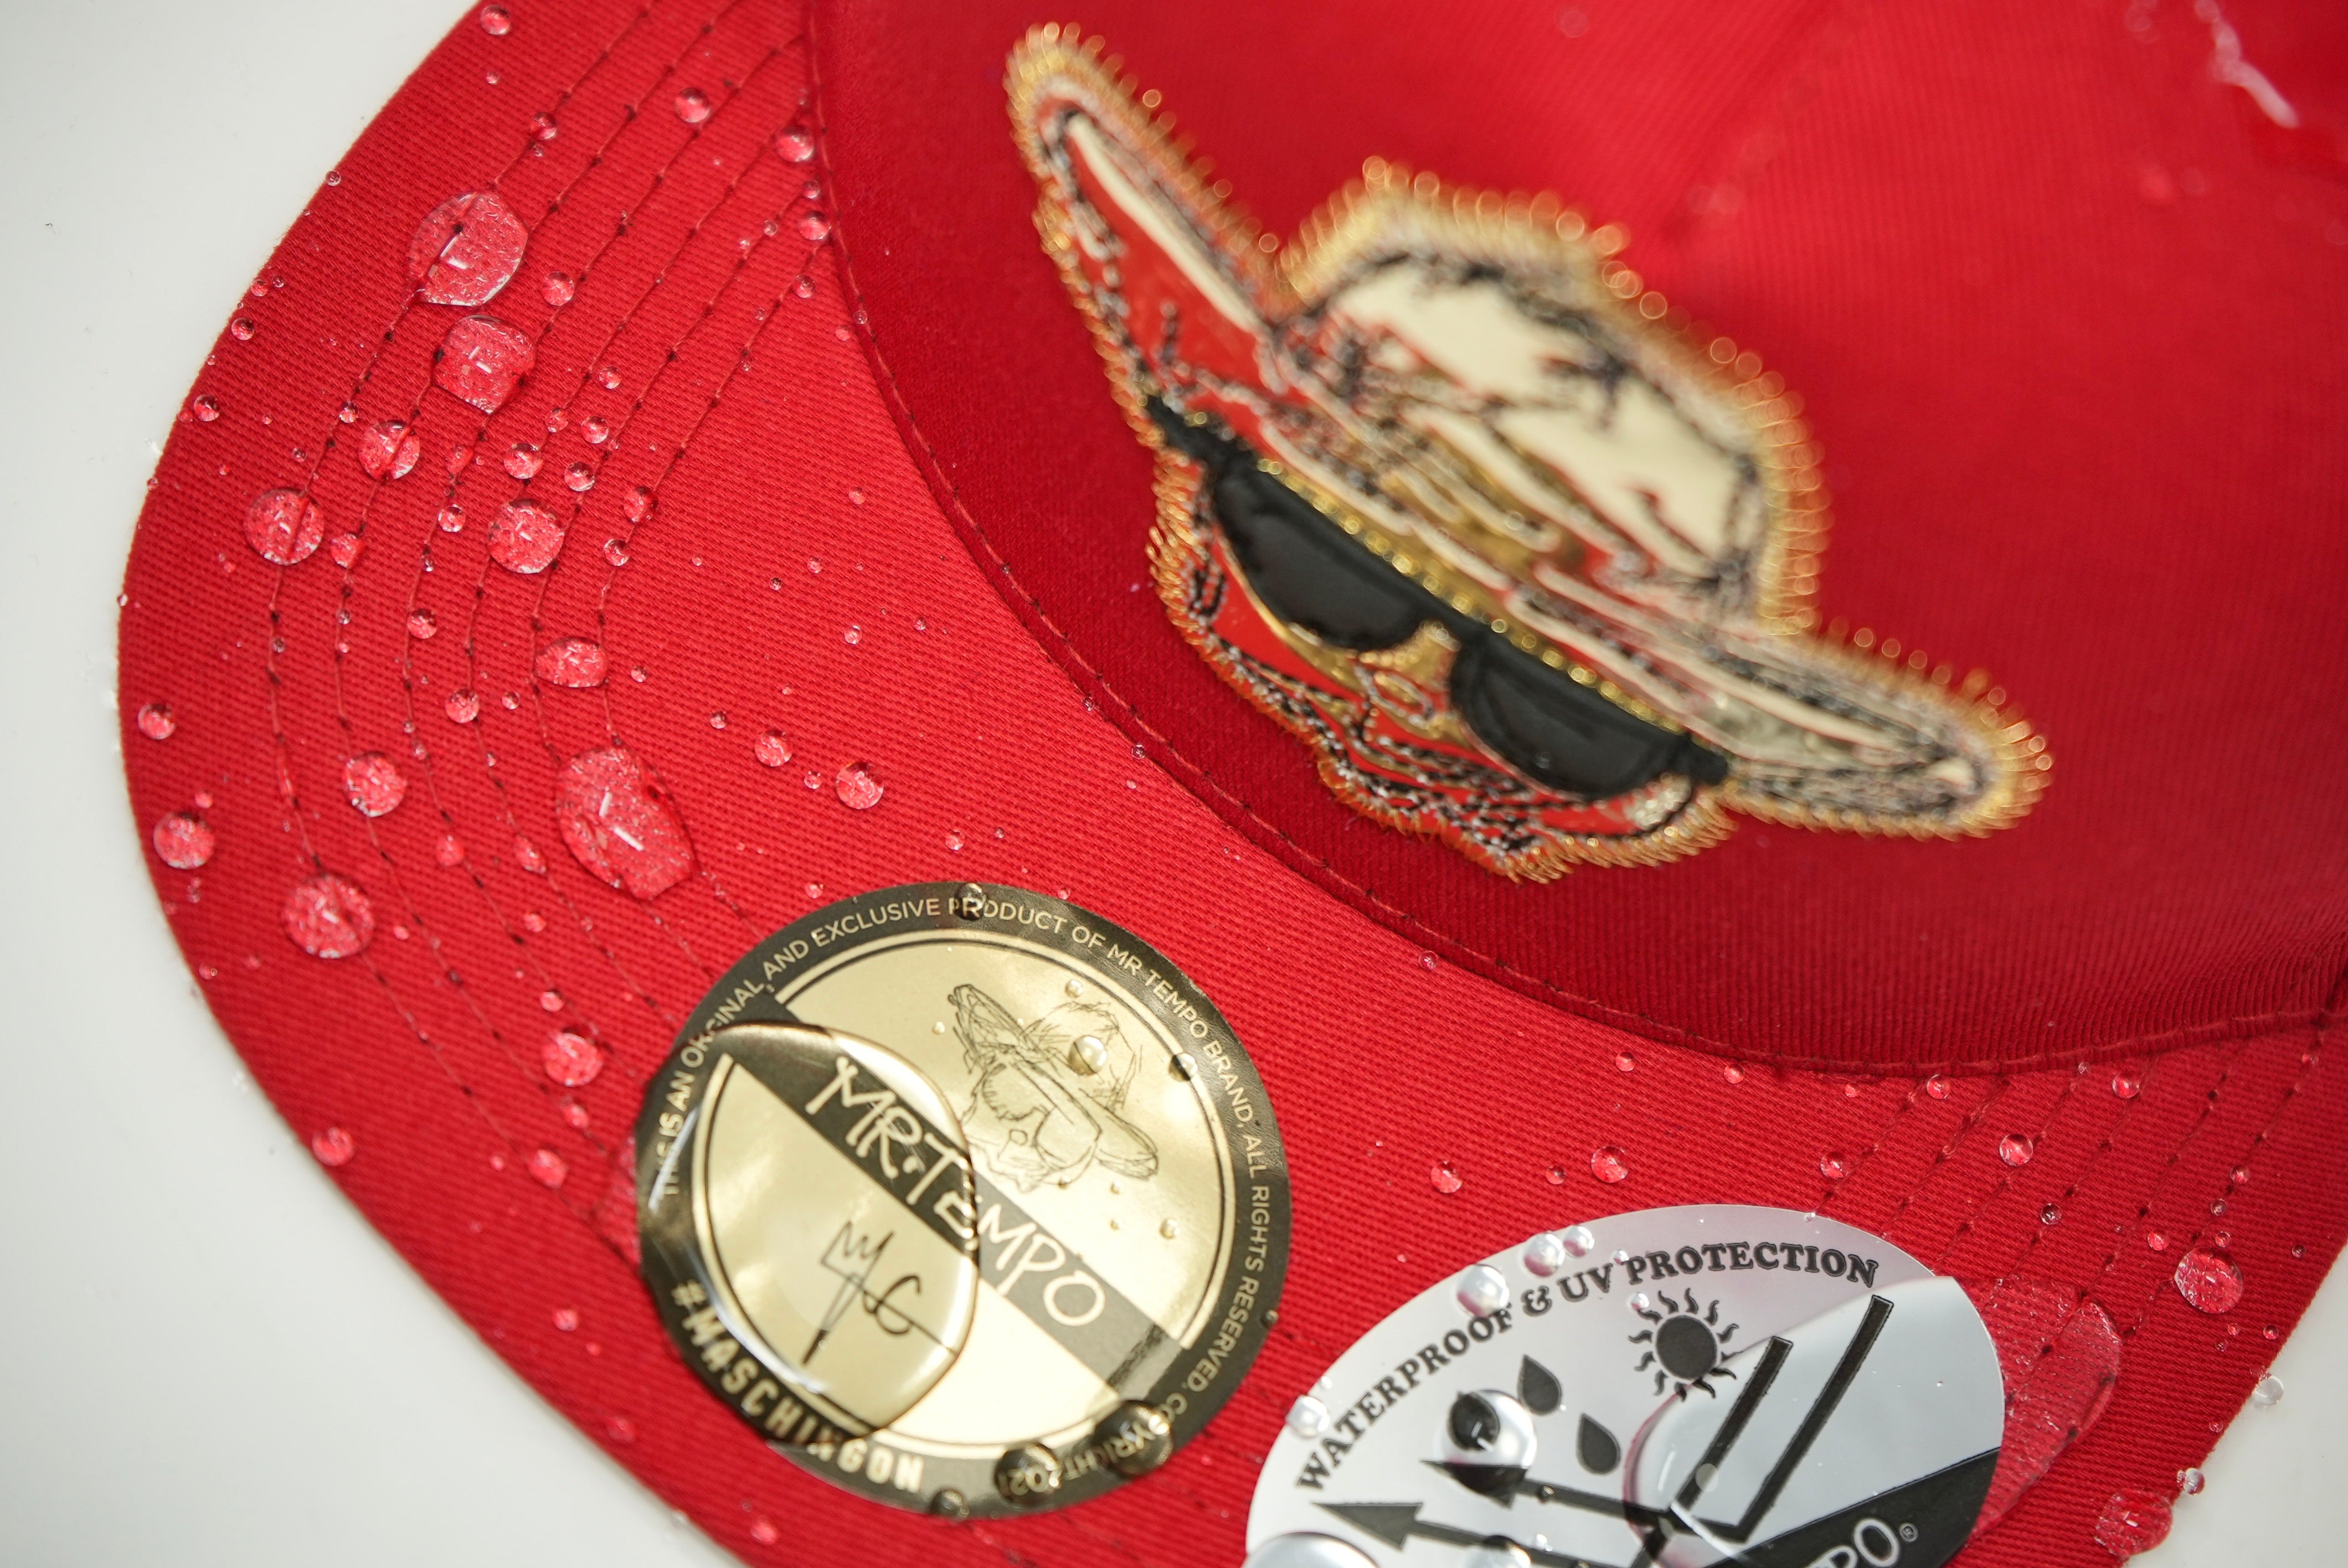 Mr. Tempo Gold/Red Hat “Mexican Flag” Visor